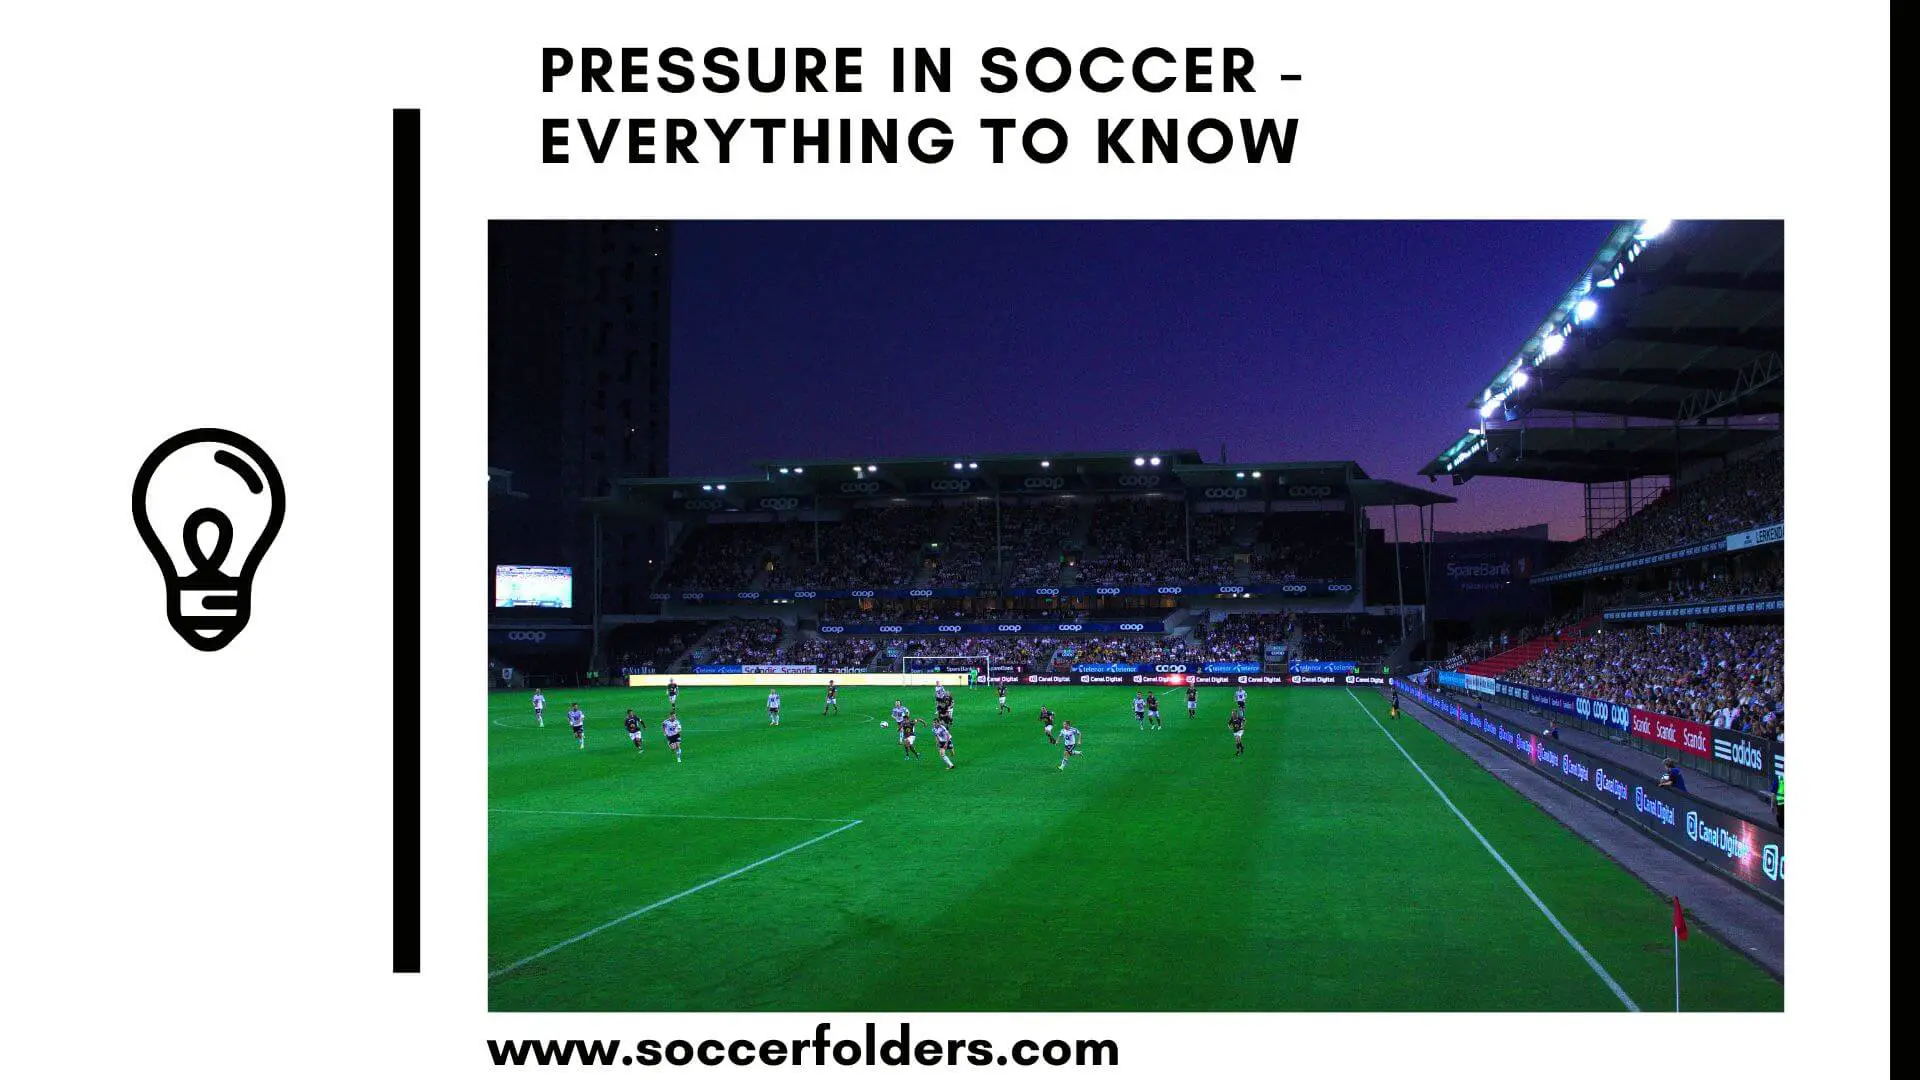 Pressure in soccer - Featured Image